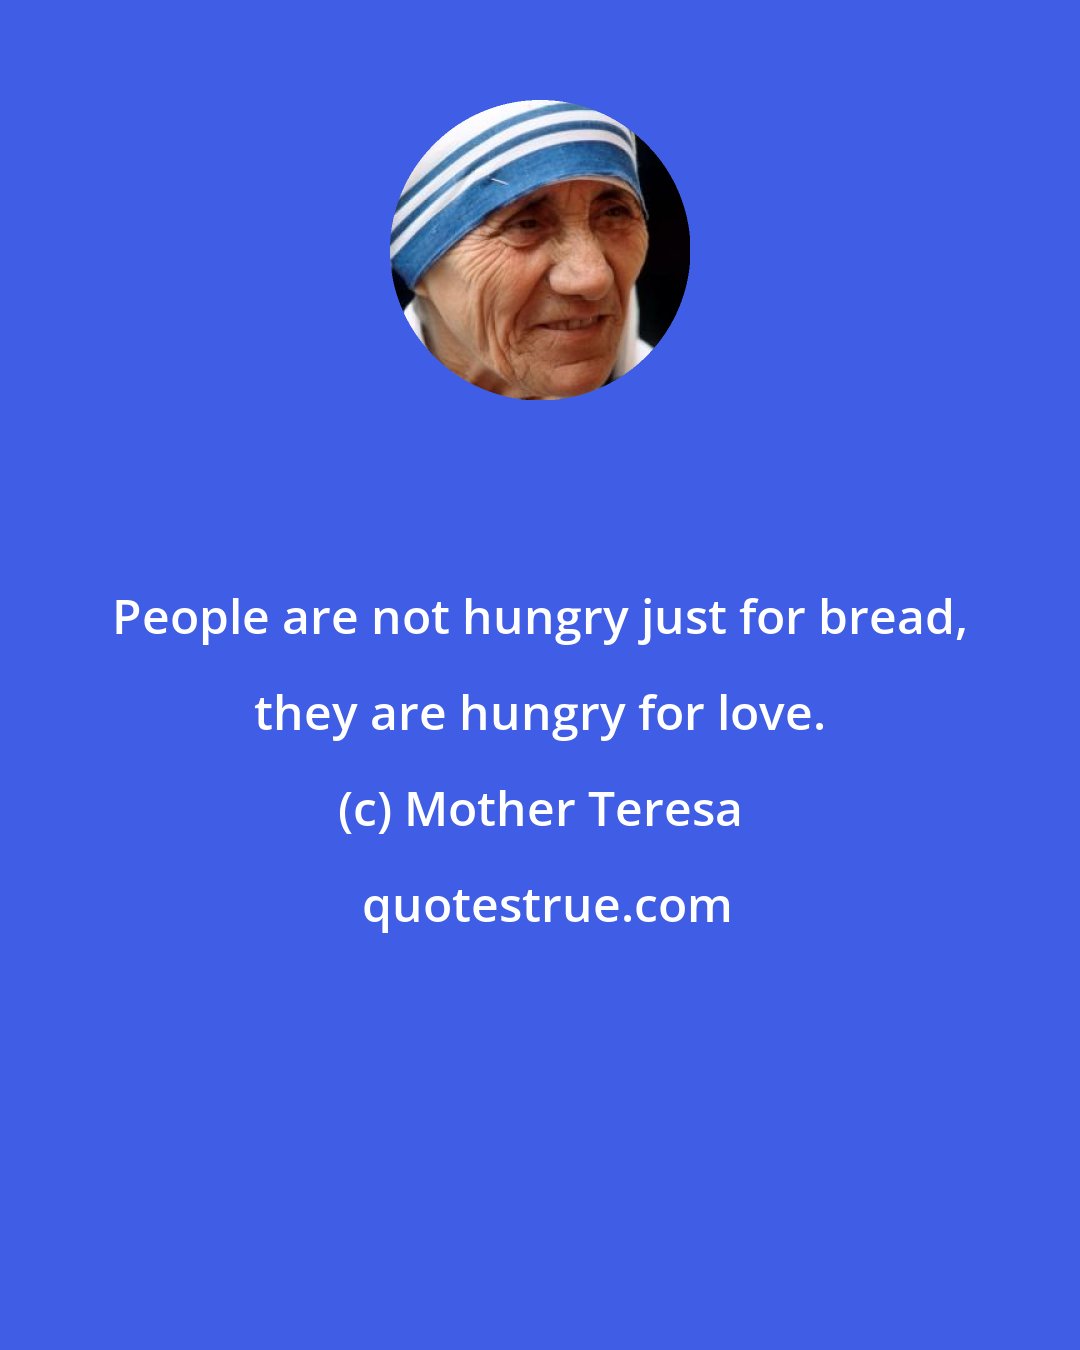 Mother Teresa: People are not hungry just for bread, they are hungry for love.